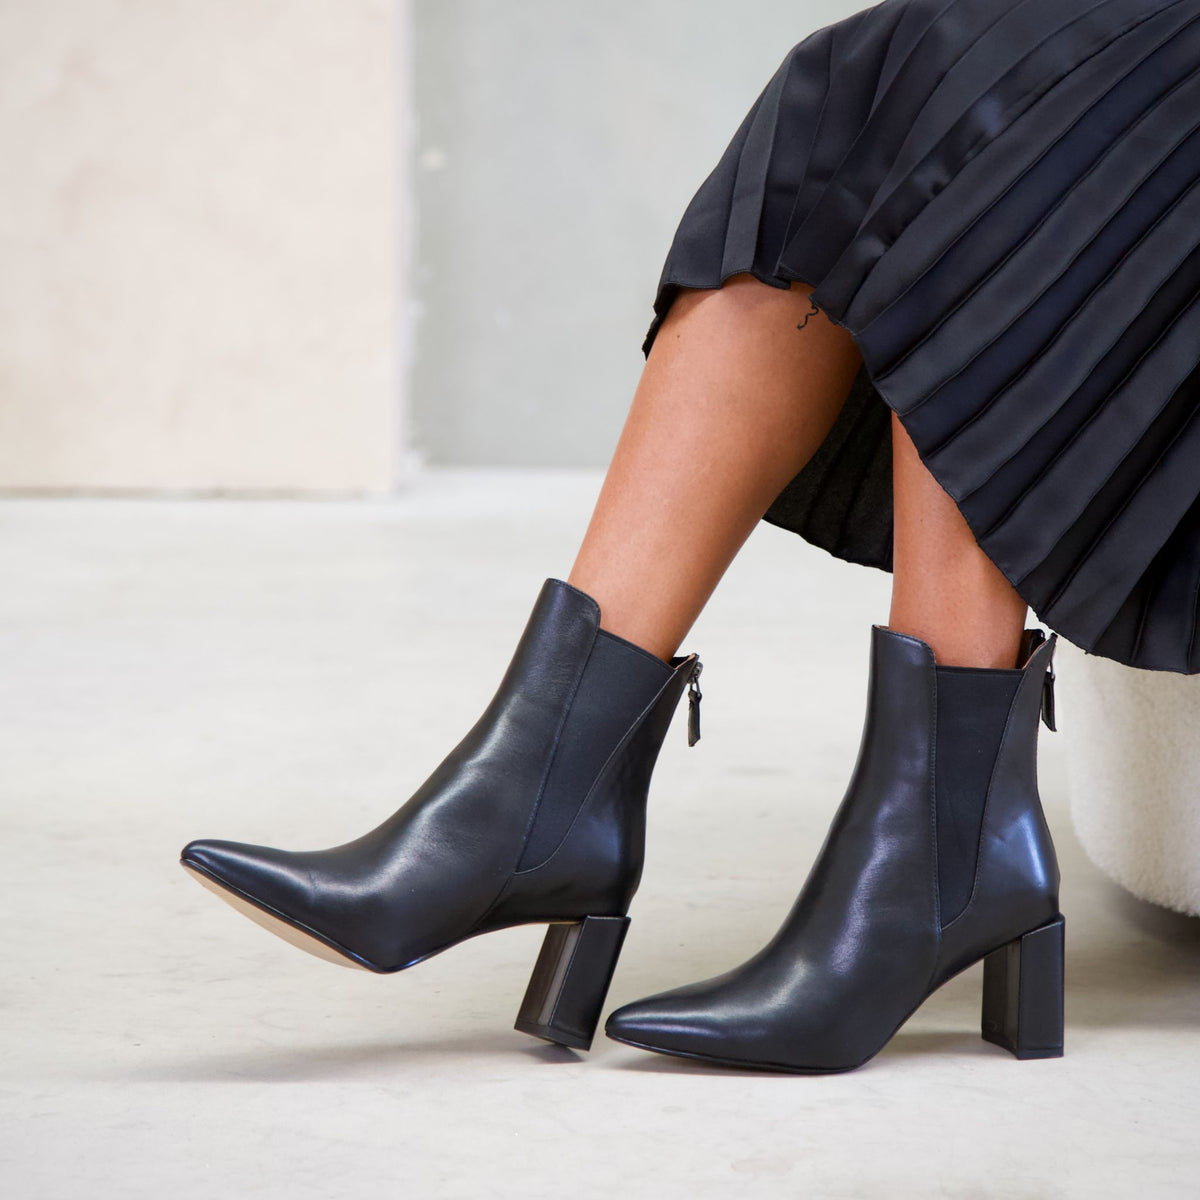 Beacon Black Leather Ankle Boots